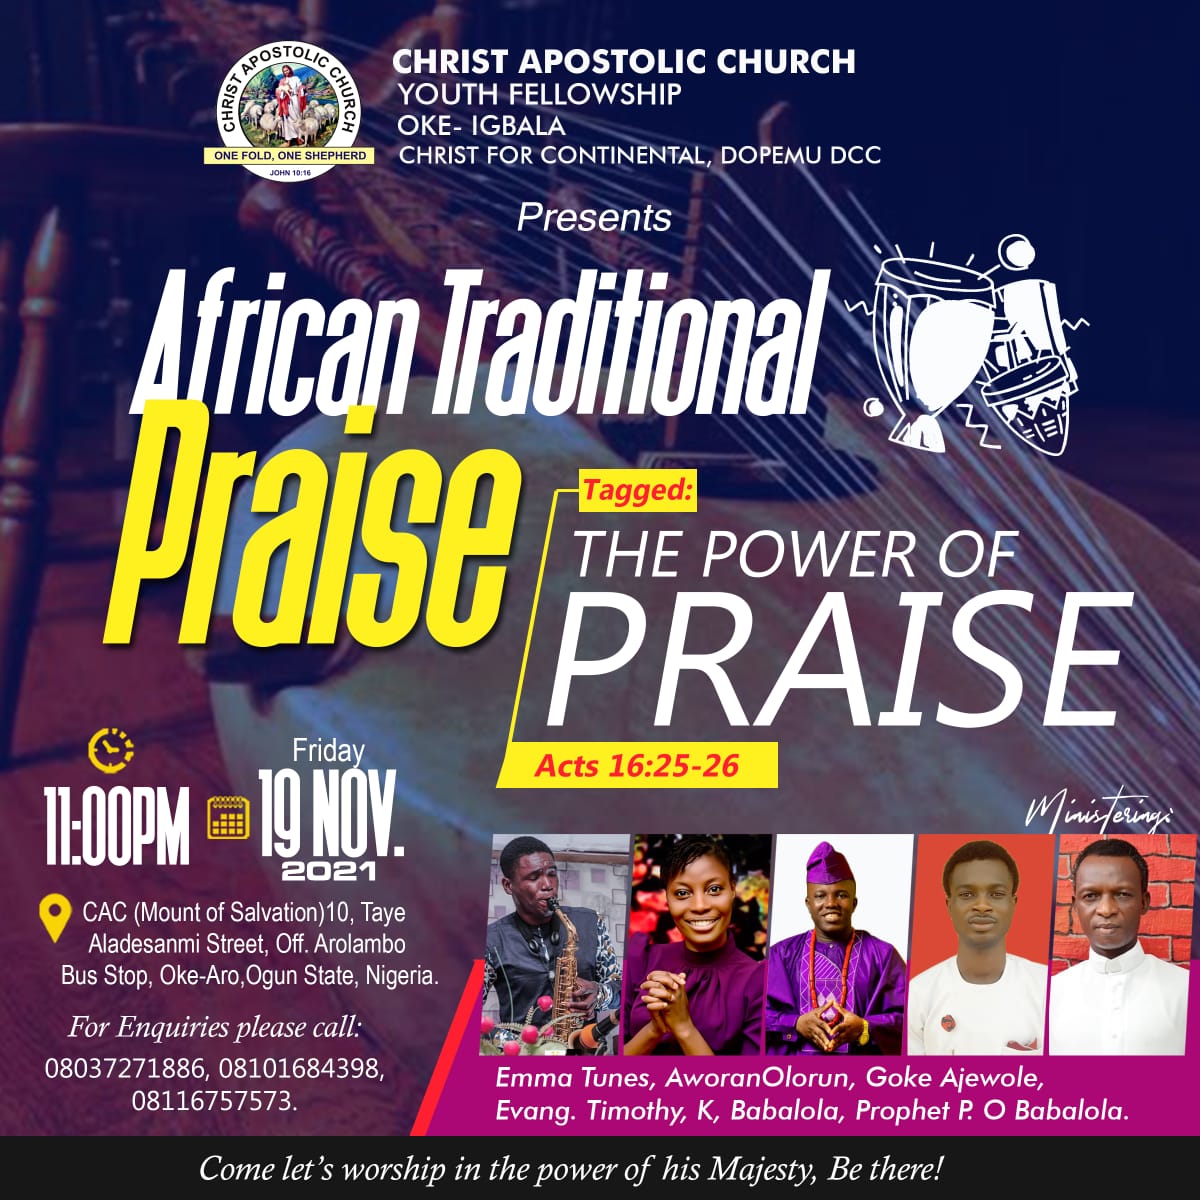 CAC Youth Fellowship Readies For African Traditional Praise 2021